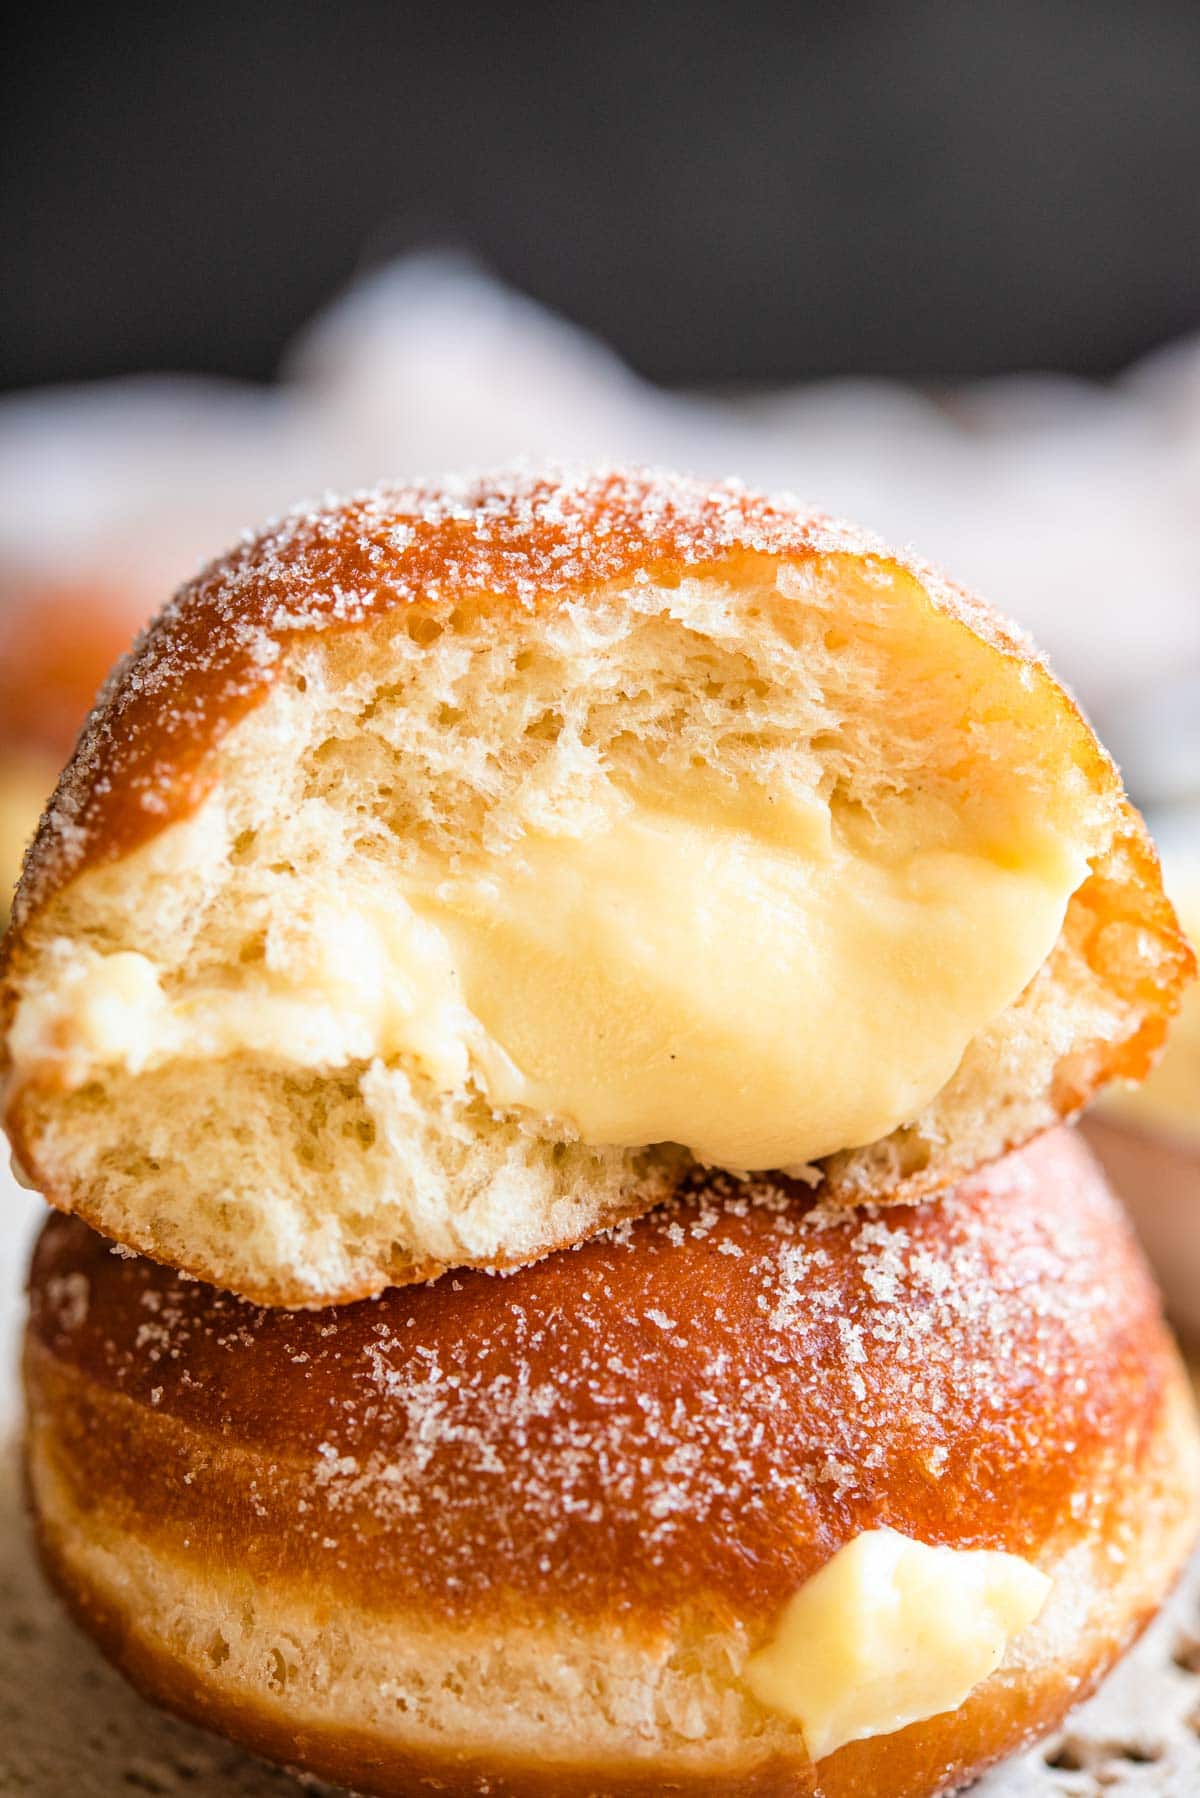 A close up of an Italian doughnut cut in half with a pastry cream filling